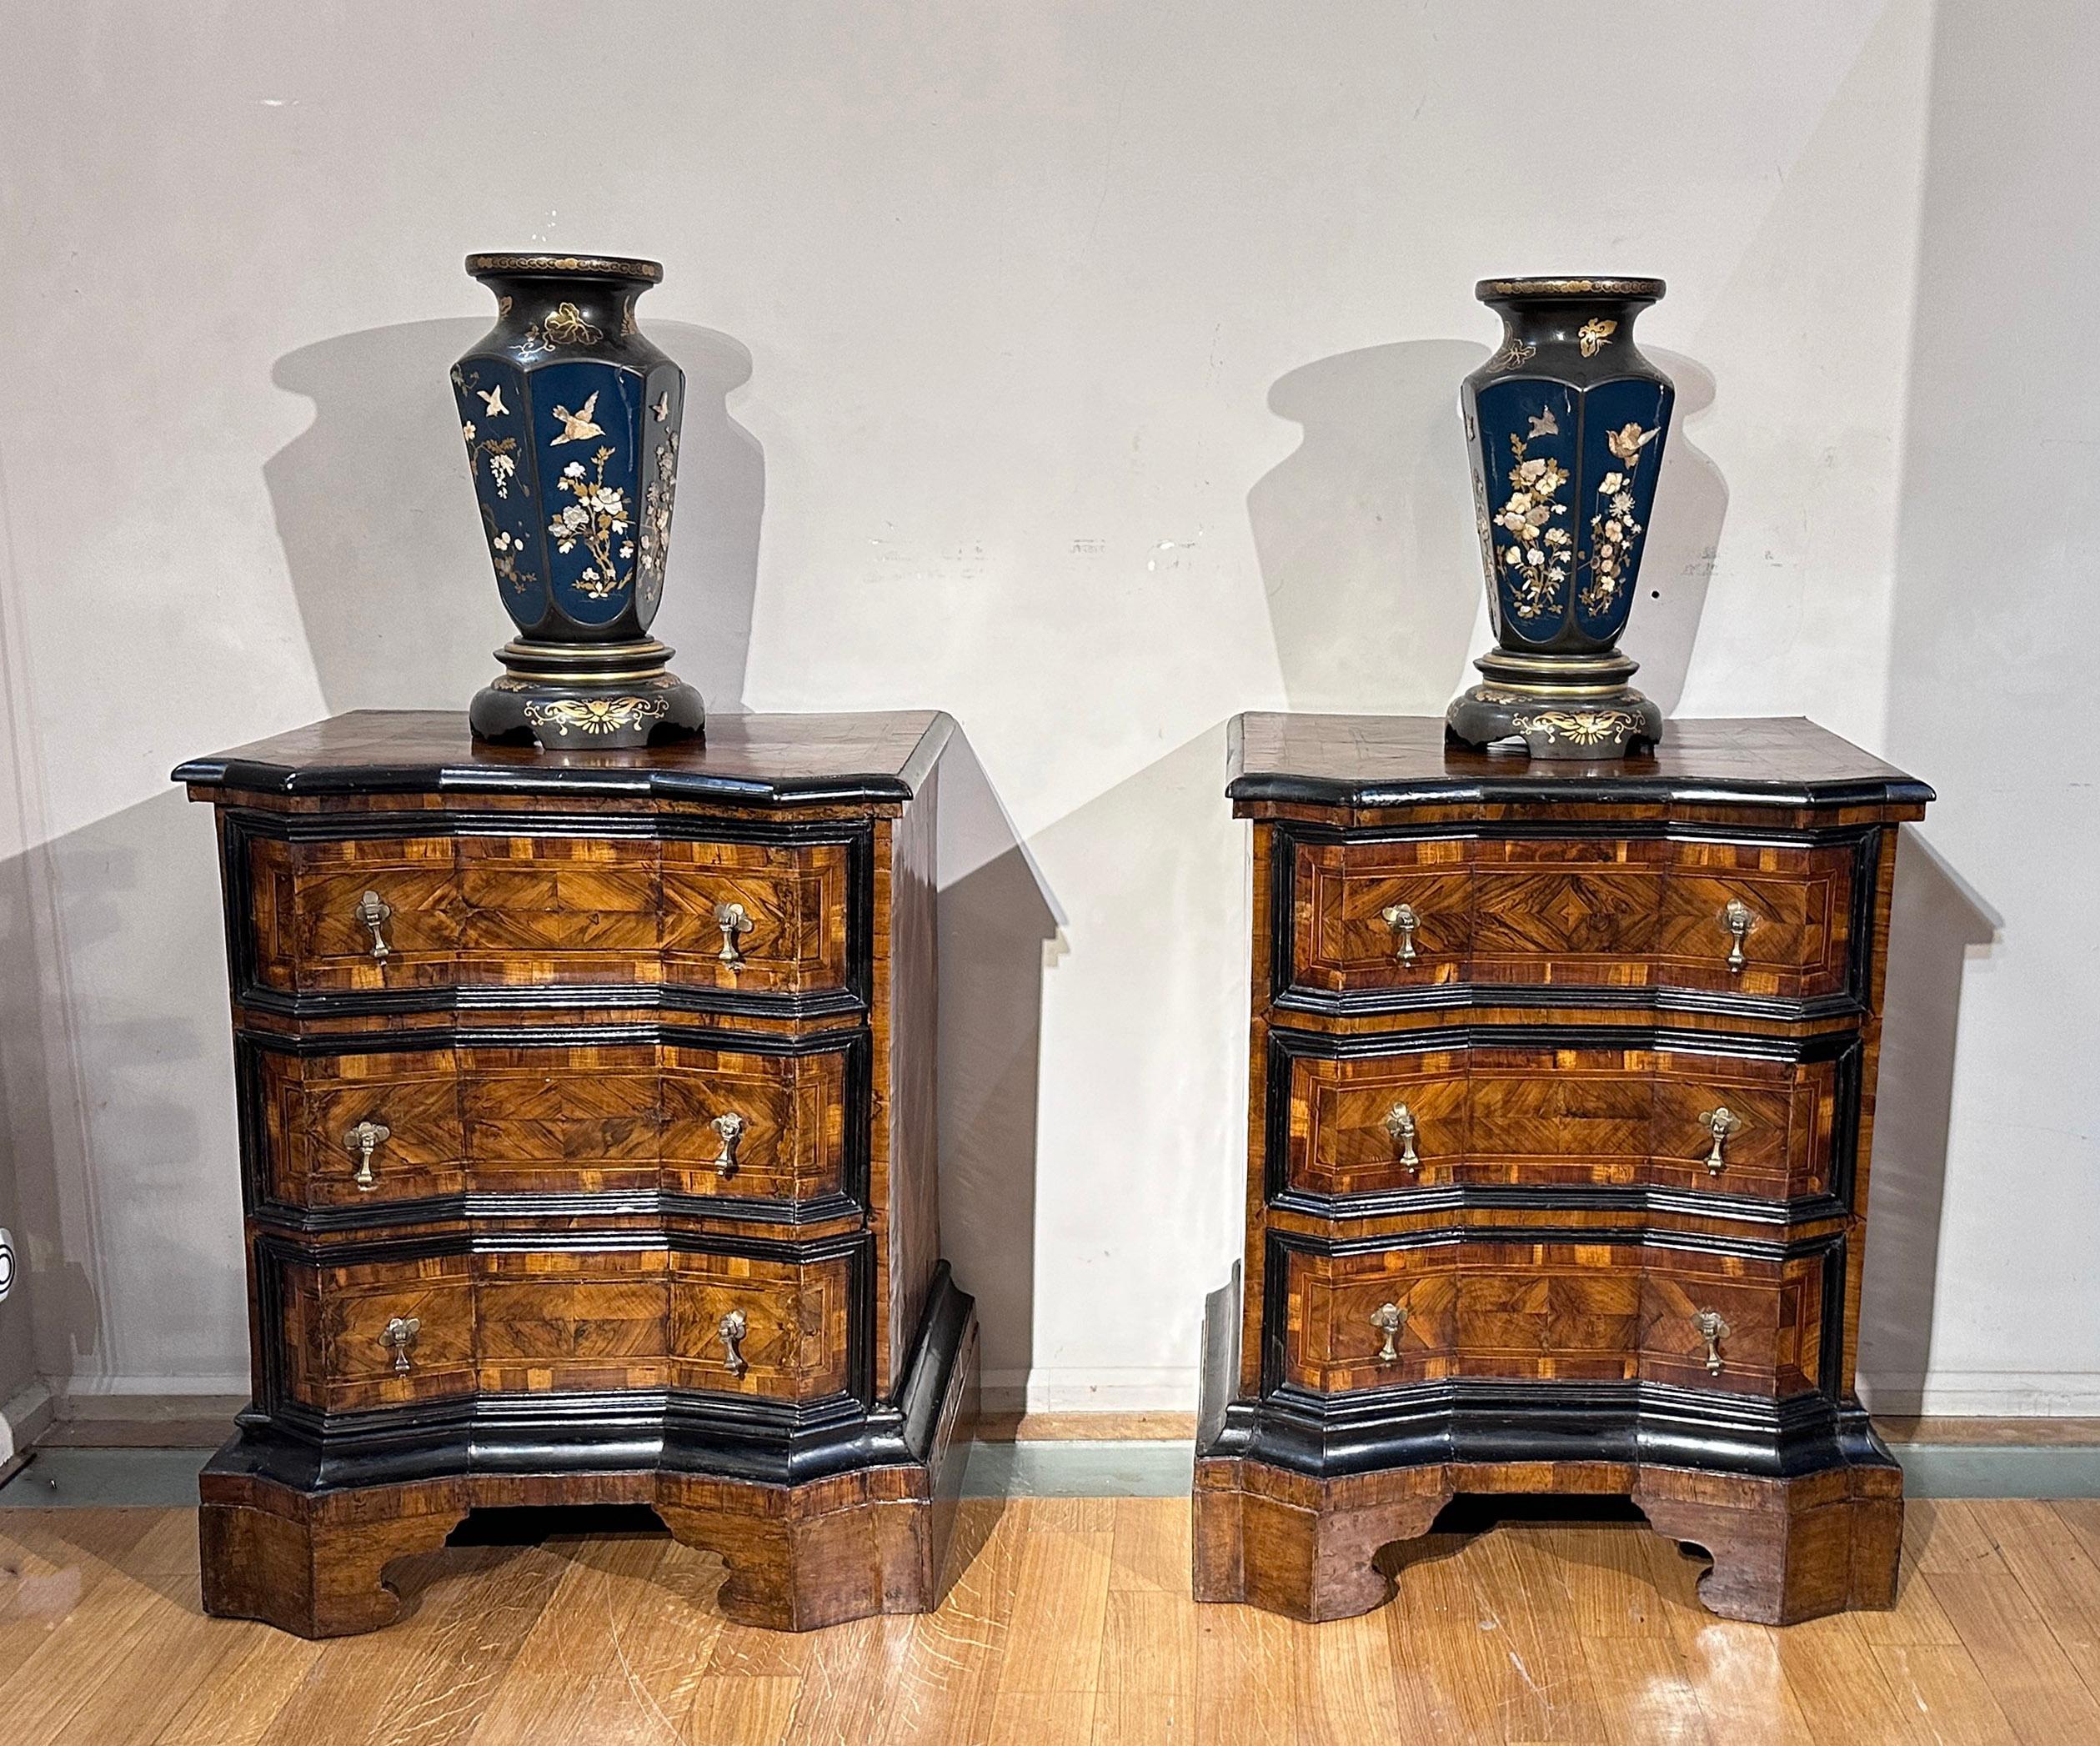 EARLY 18th CENTURY PAIR OF CHESTS LOUIS XIV  For Sale 2